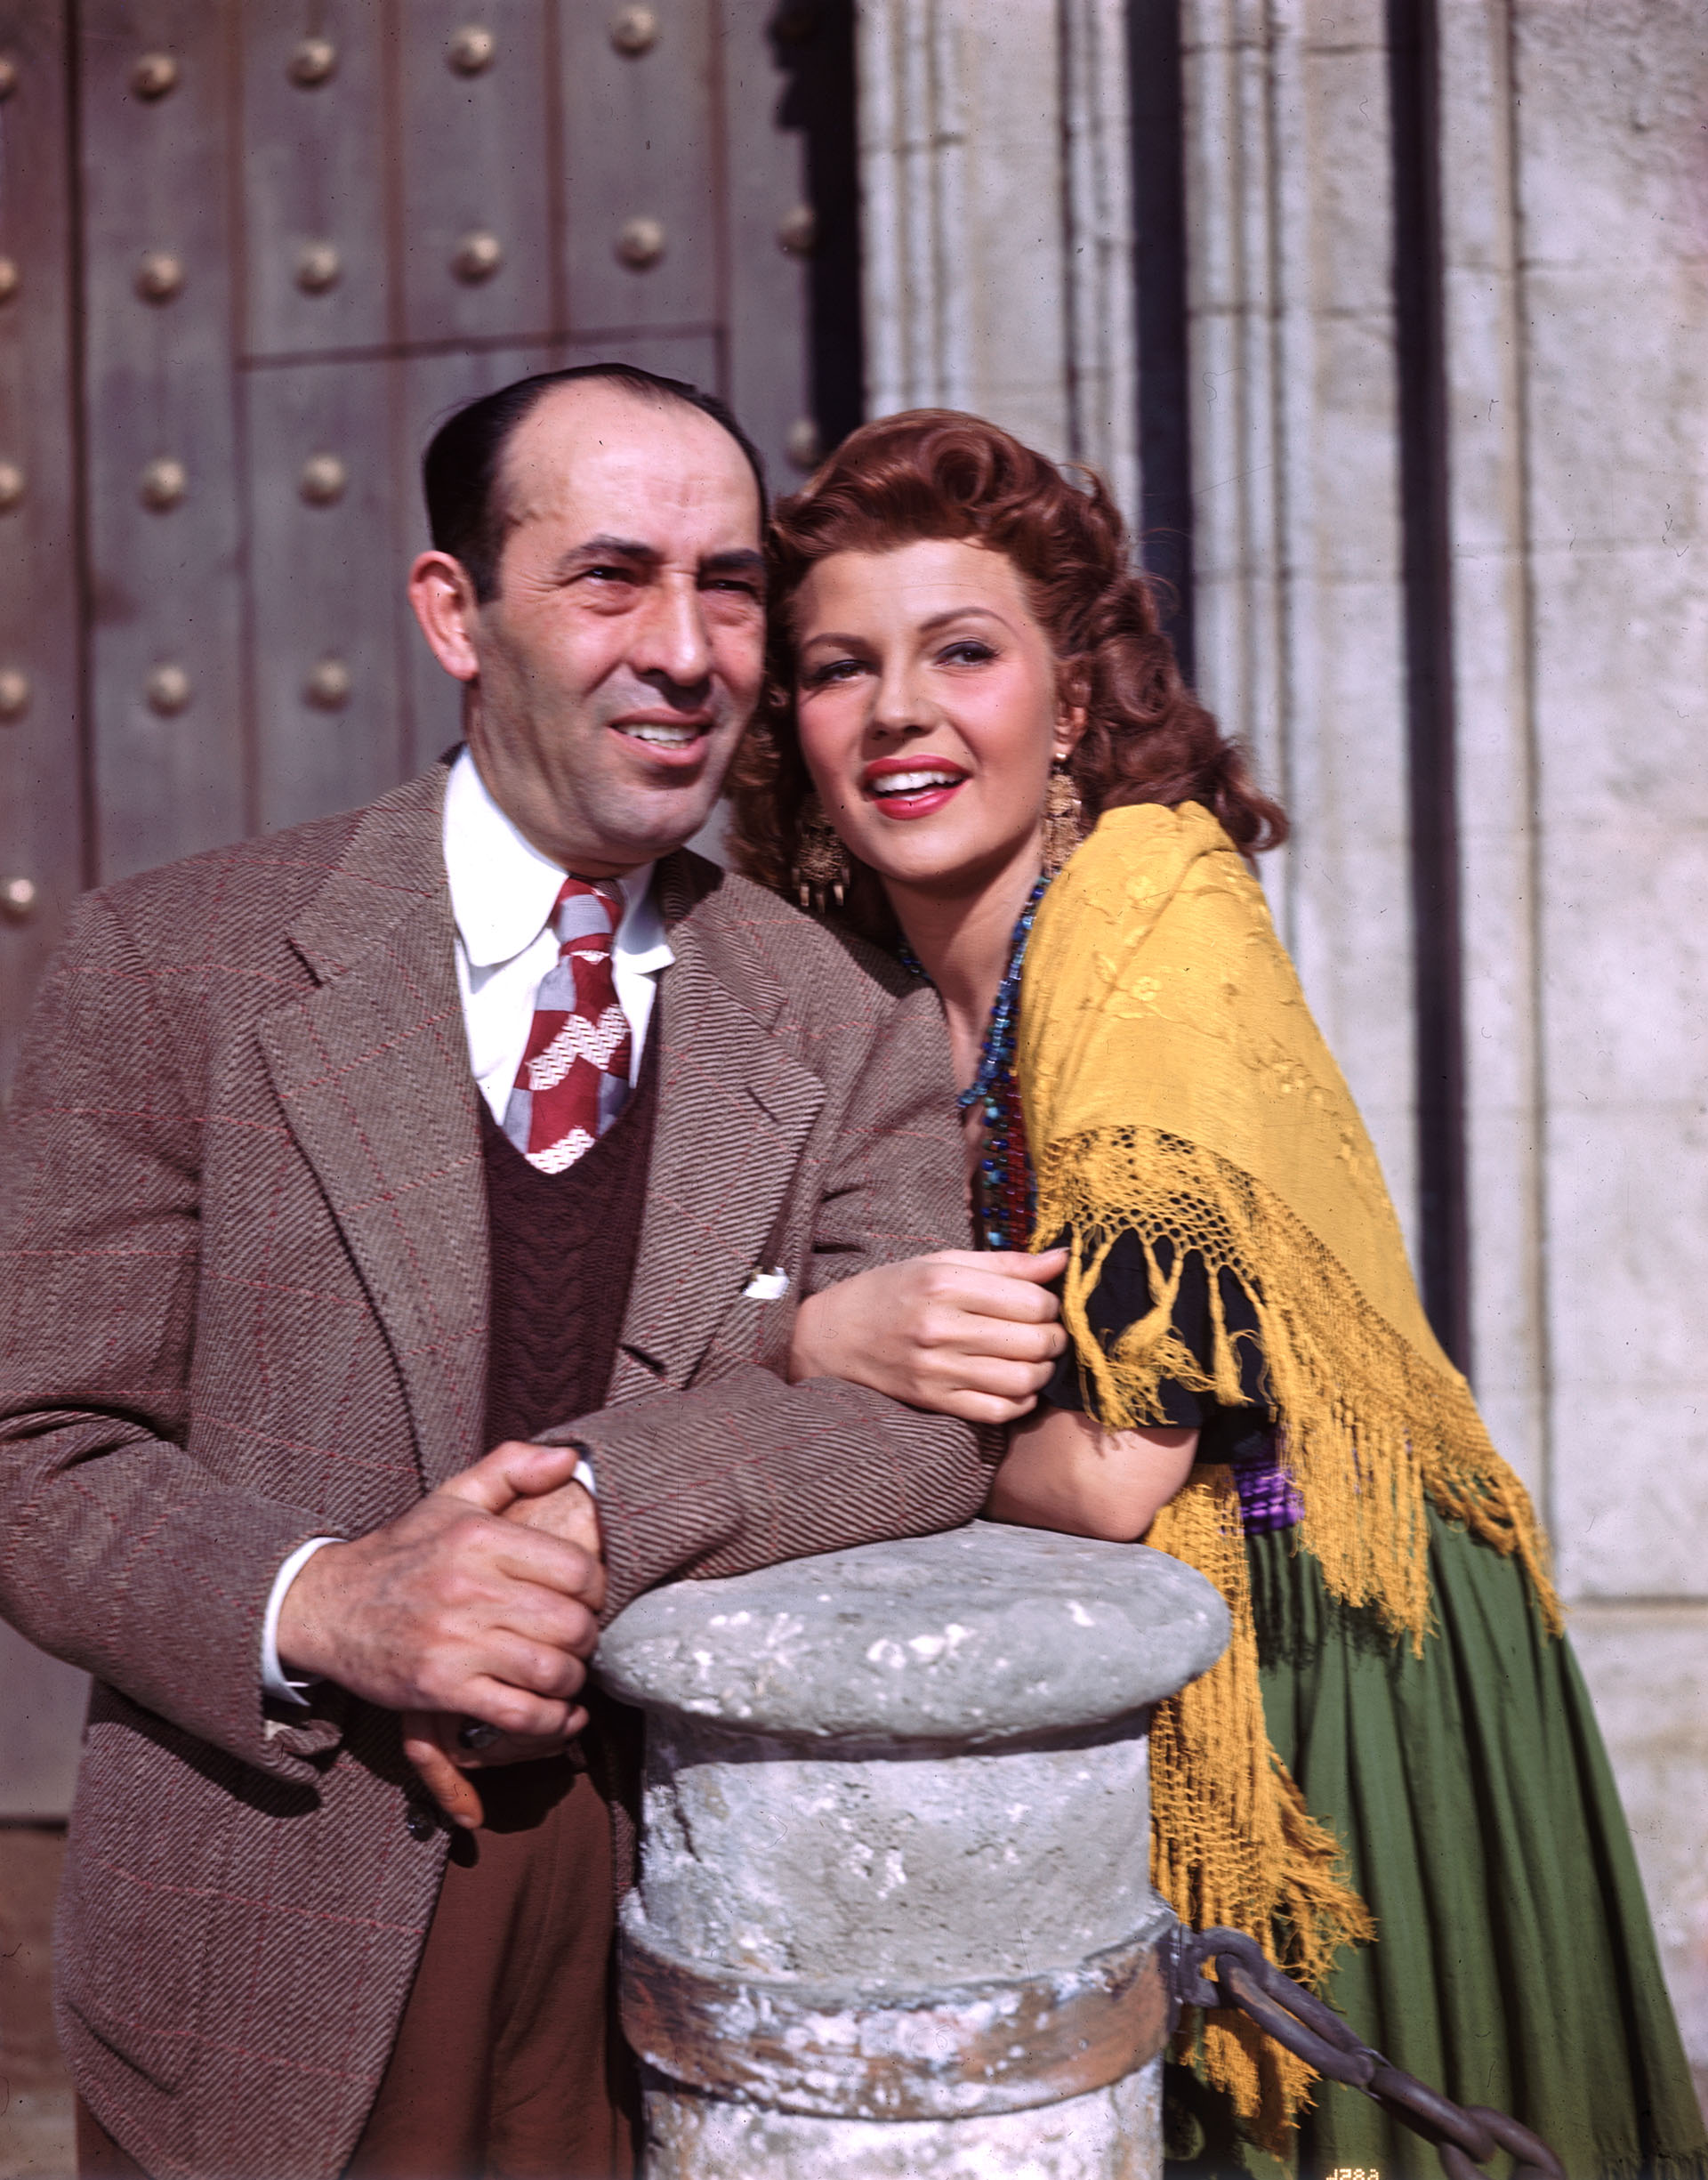 Rita Hayworth with her father Eduardo Cansino in 1948. on the film set of 'Los amores de Carmen'.  HE had always abused her, but the young actress tried to hide the tragedy that had marked her life (Hulton Archive/Getty Images)